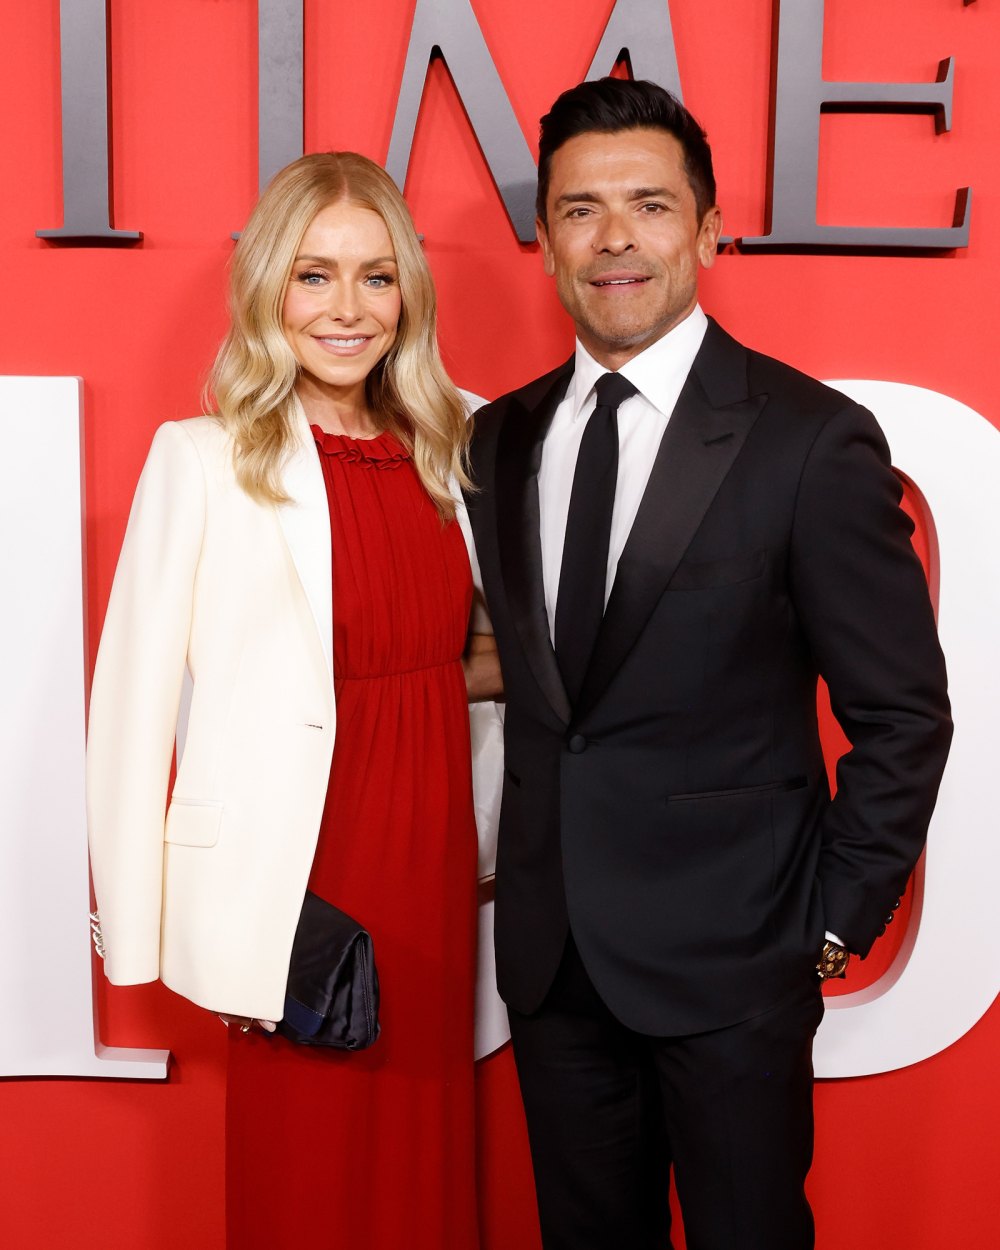 Kelly Ripa and Mark Consuelos Reunited With Their All My Children Baby